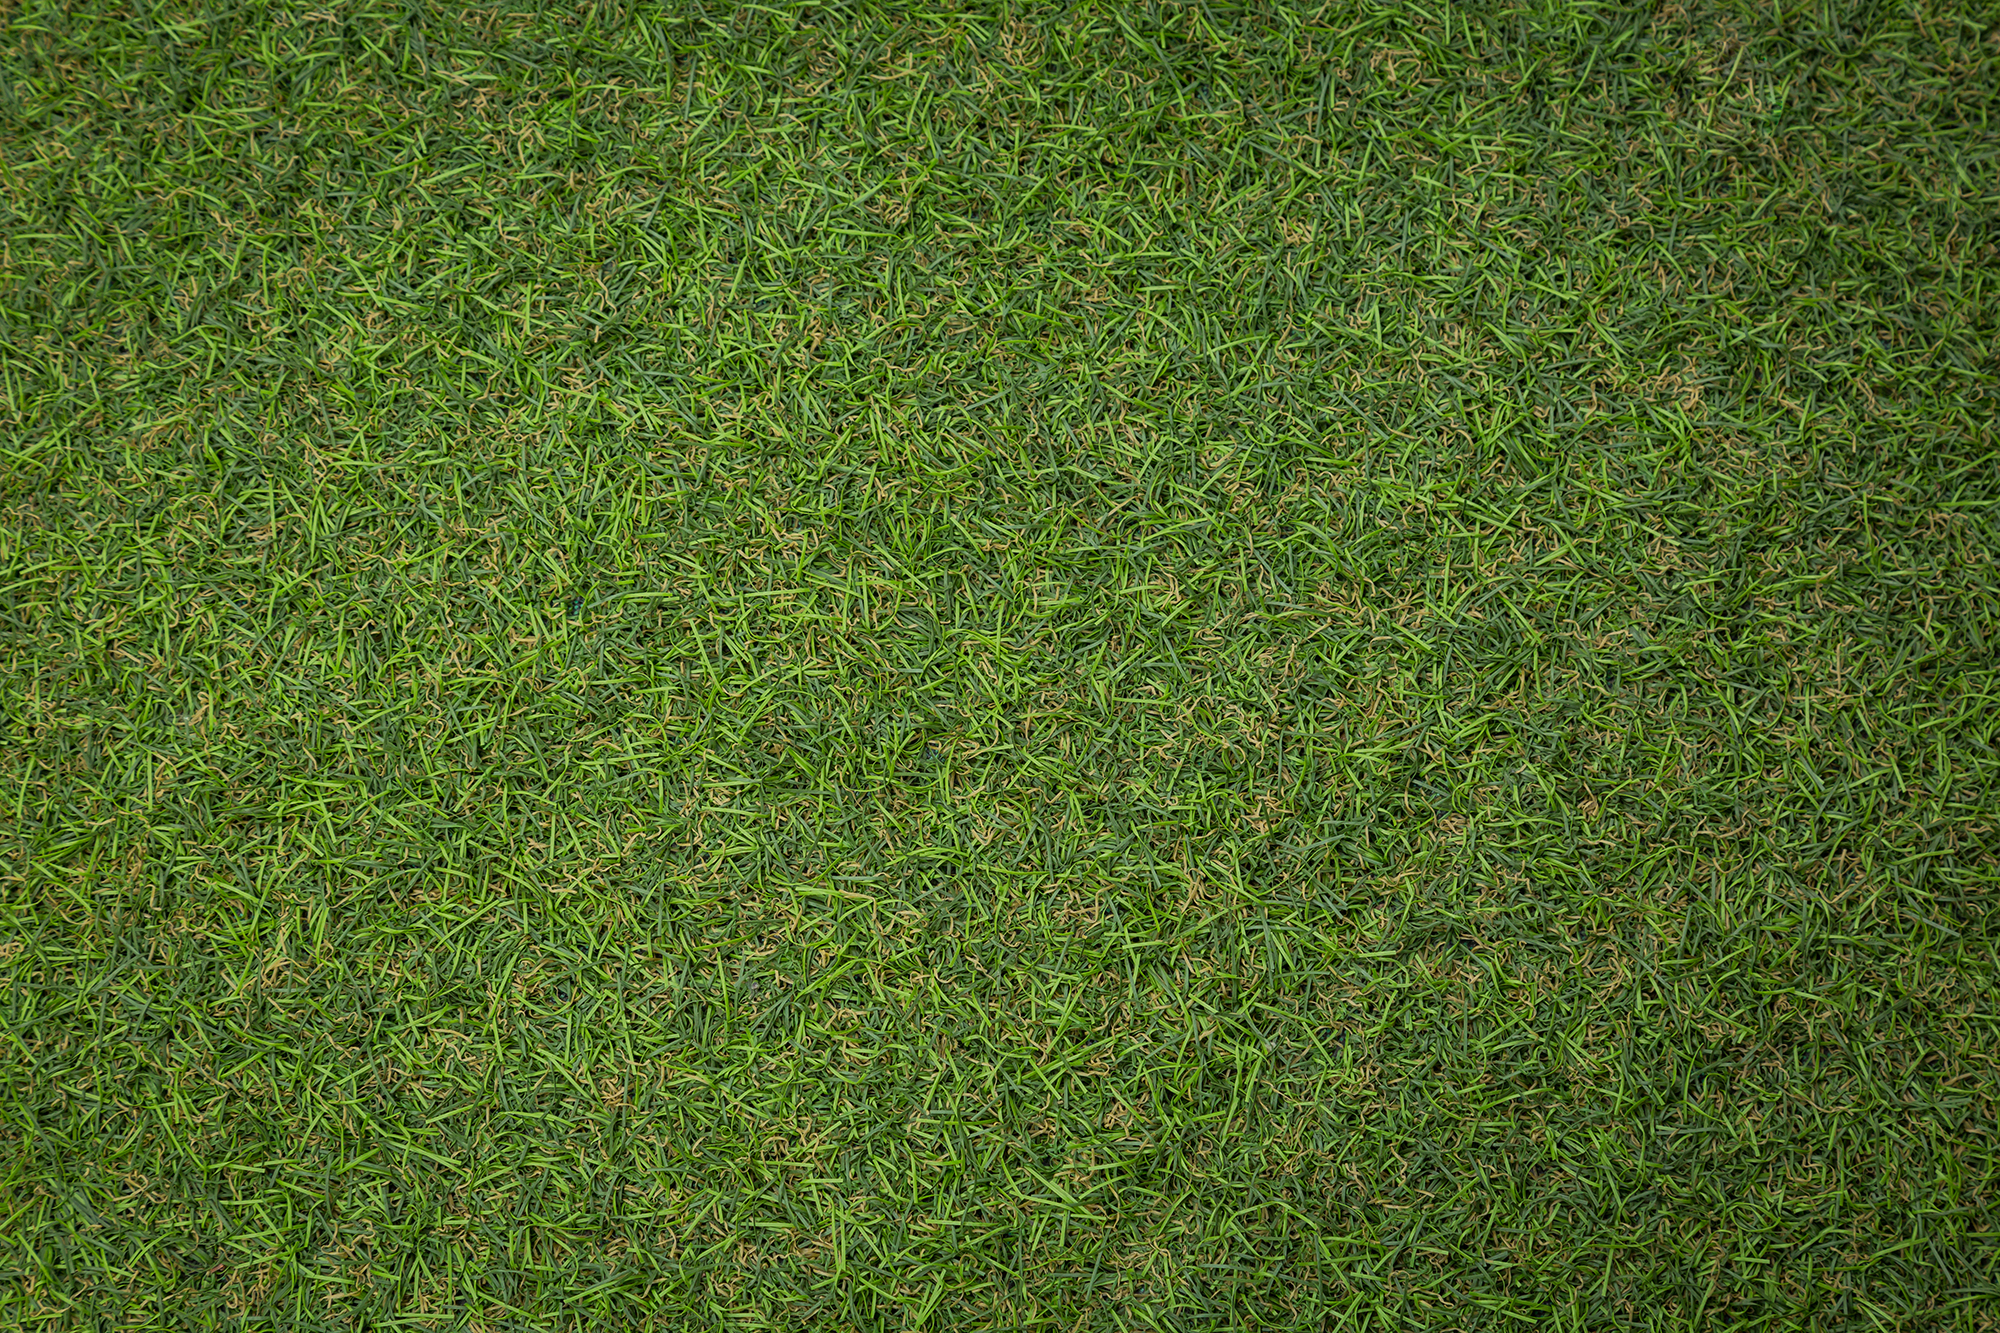 Artificial turf background